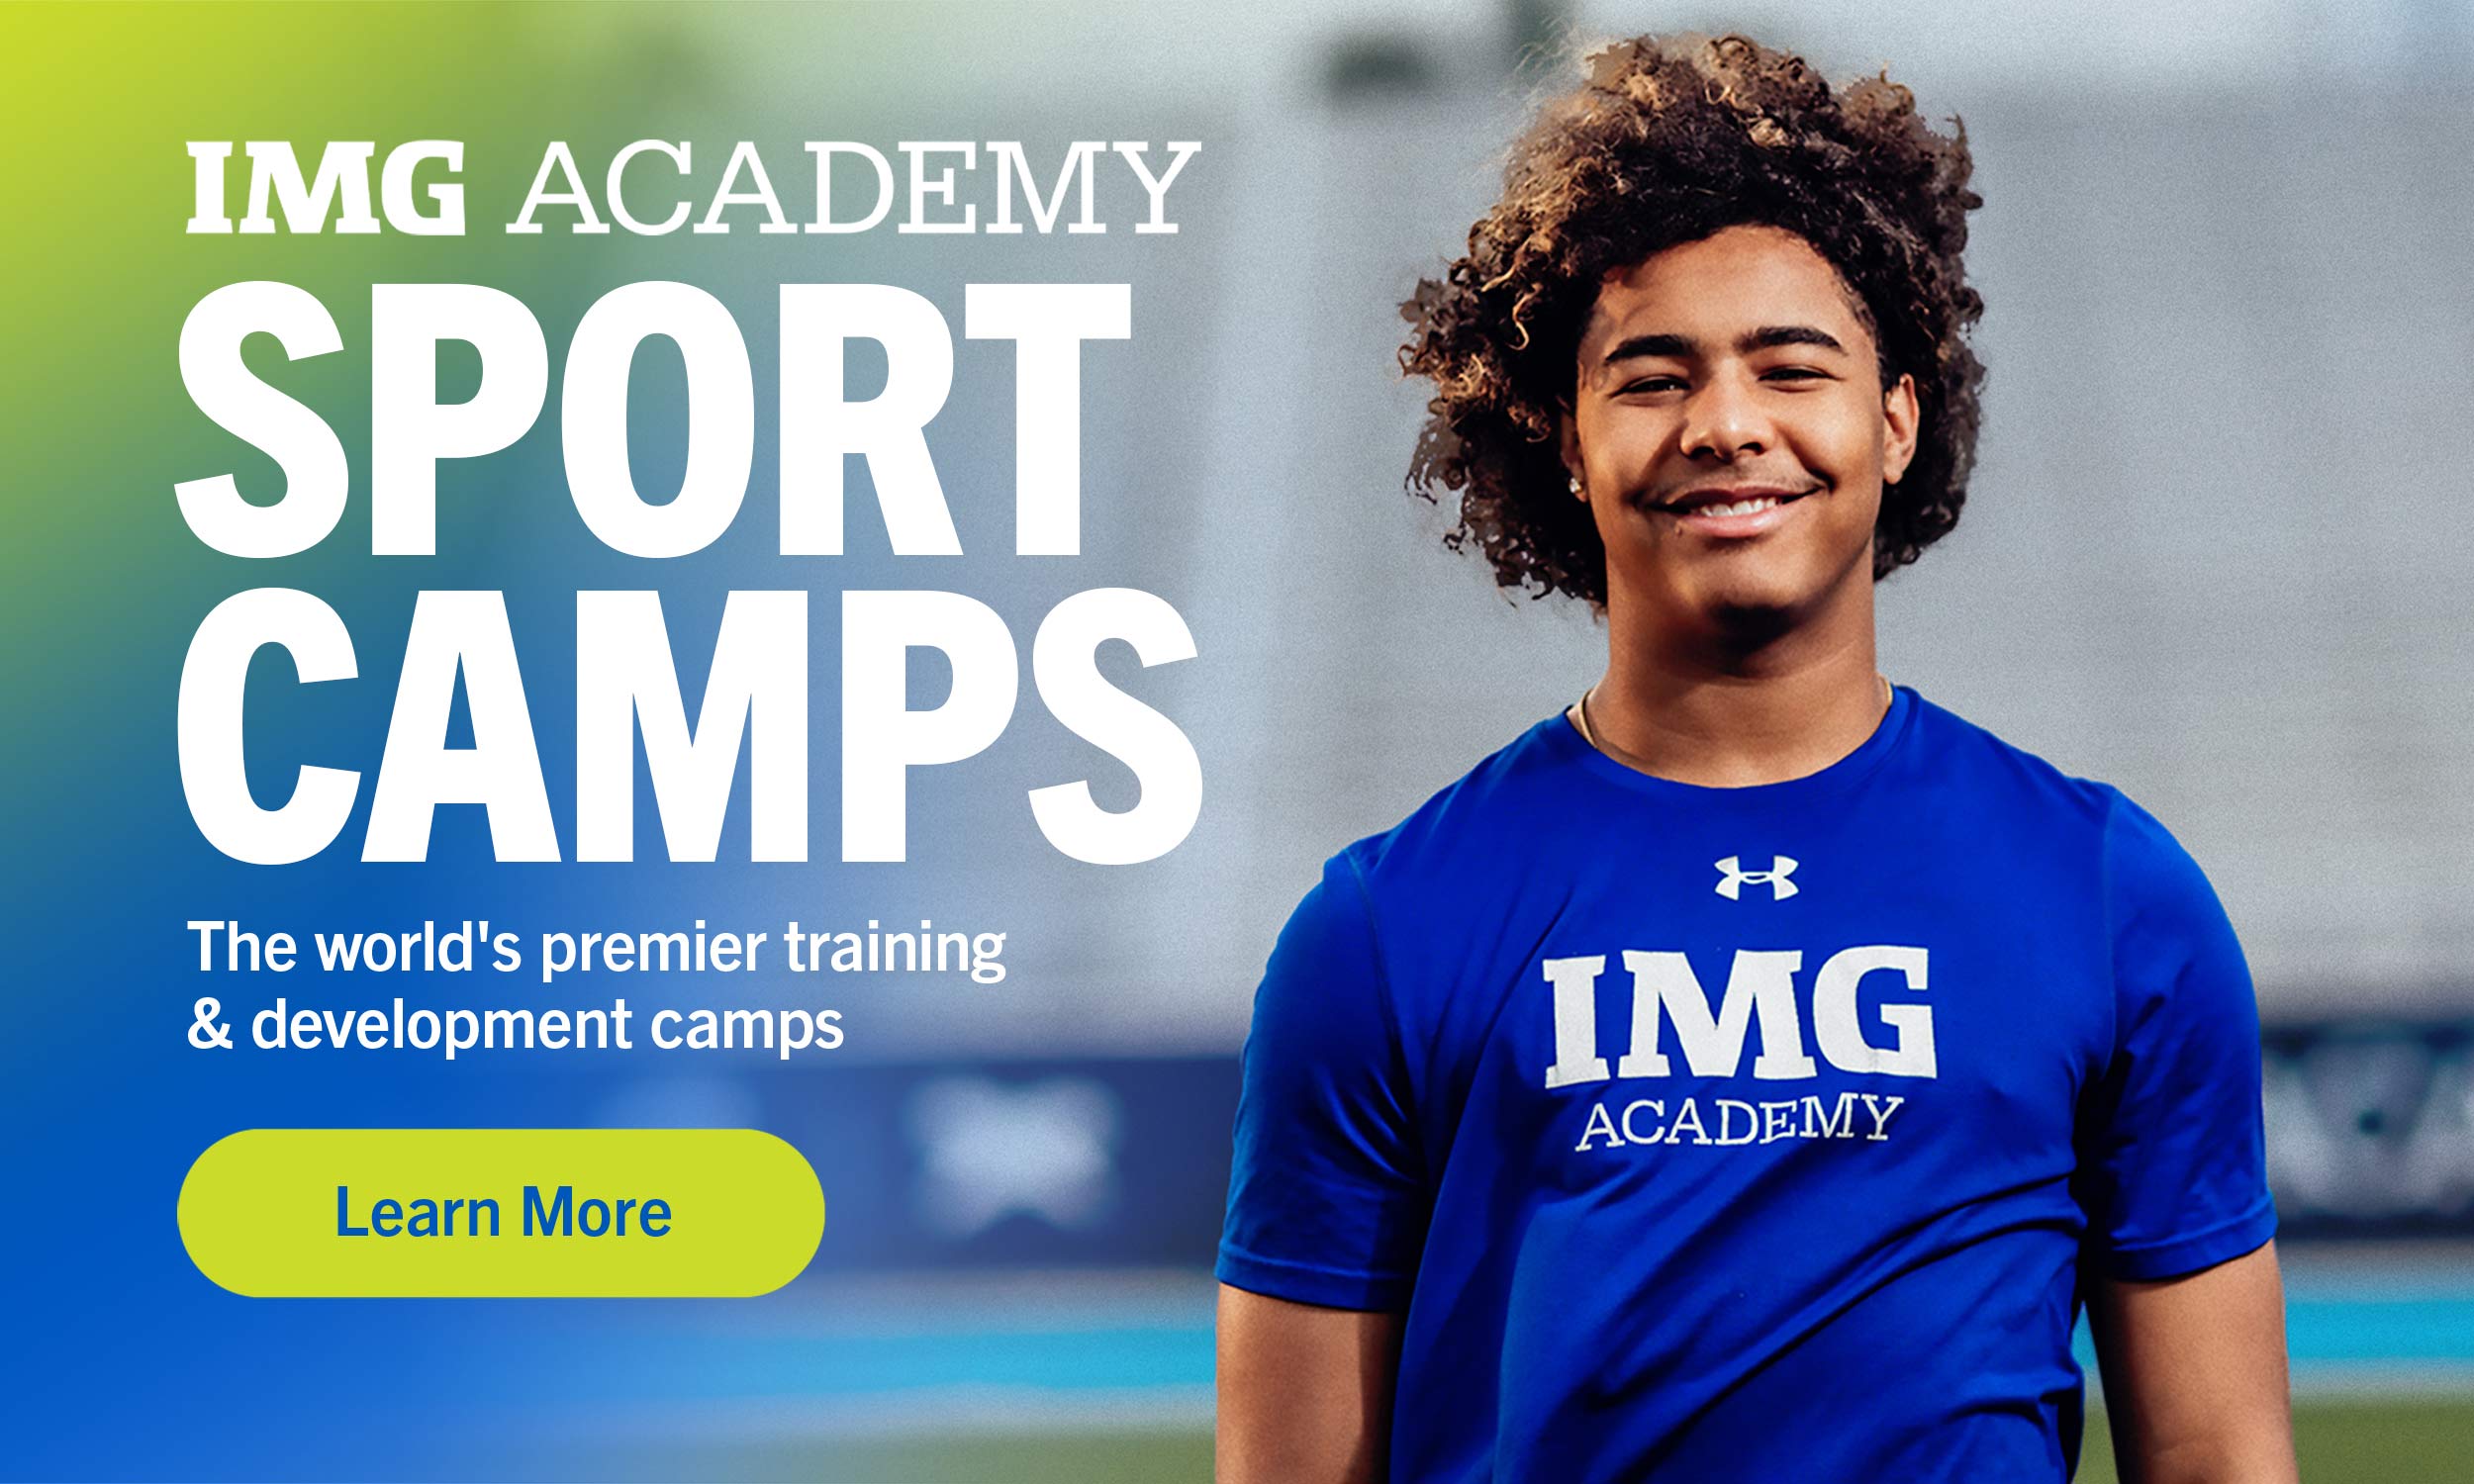 Learn more about IMG Academy Sport Camps